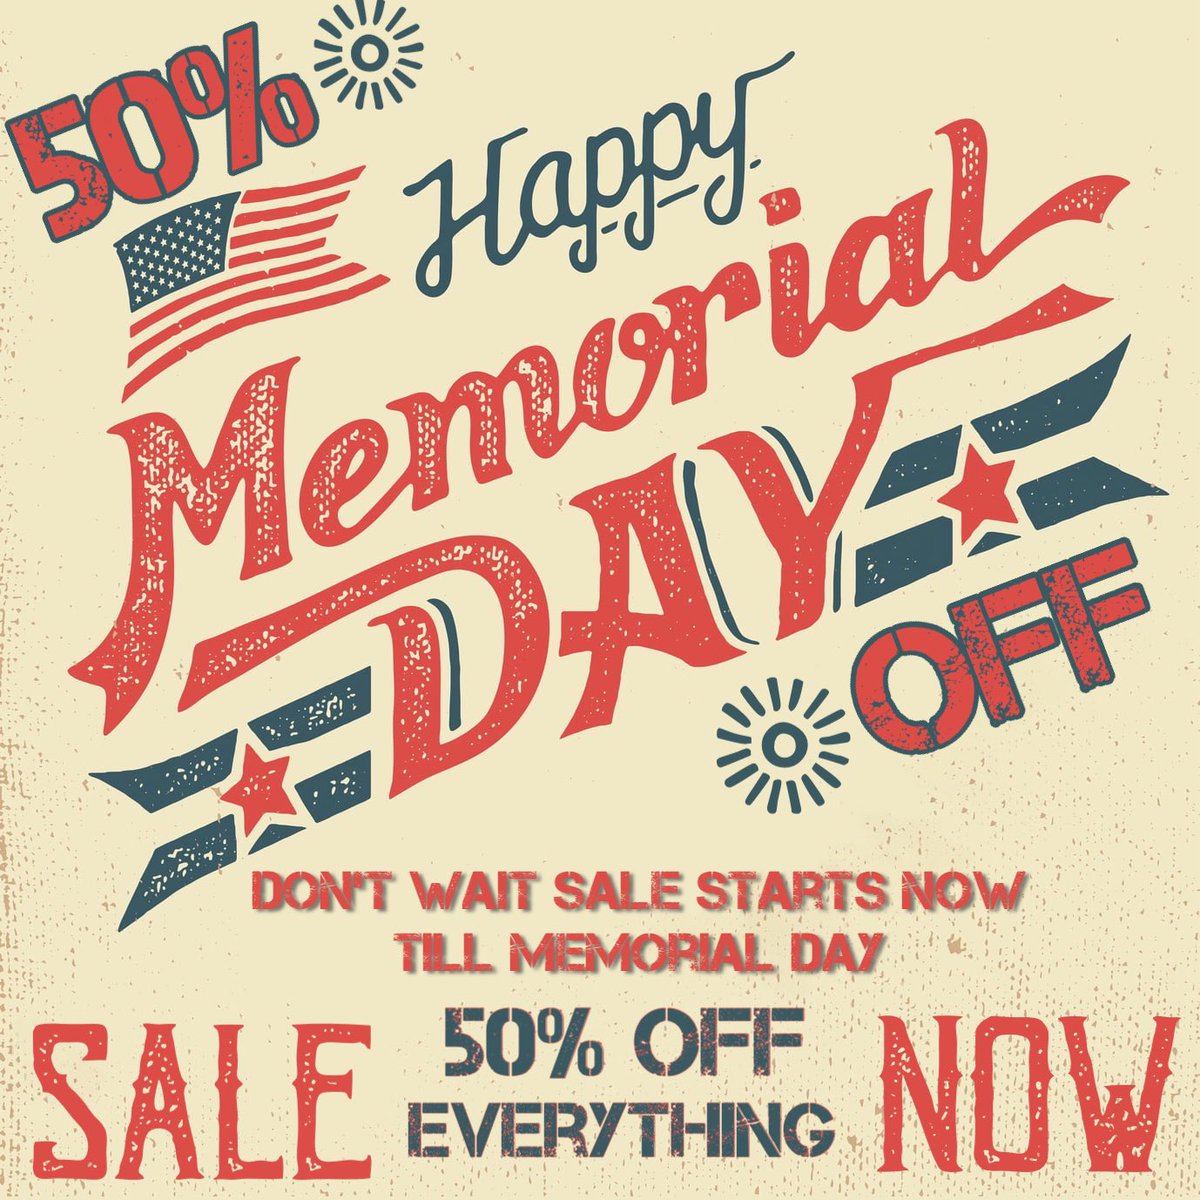 🇺🇸MEMORIAL DAY SALE NOW🇺🇸 50% OFF EVERYTHING STARTING NOW😲 Don’t wait come find yours before someone else does ☝️All the way through Memorial Day 😎 #antique #antiques #vintage #homefurnishings #springfieldmissouri #finderskeepers #consignment #furniture #glassware  #artwork